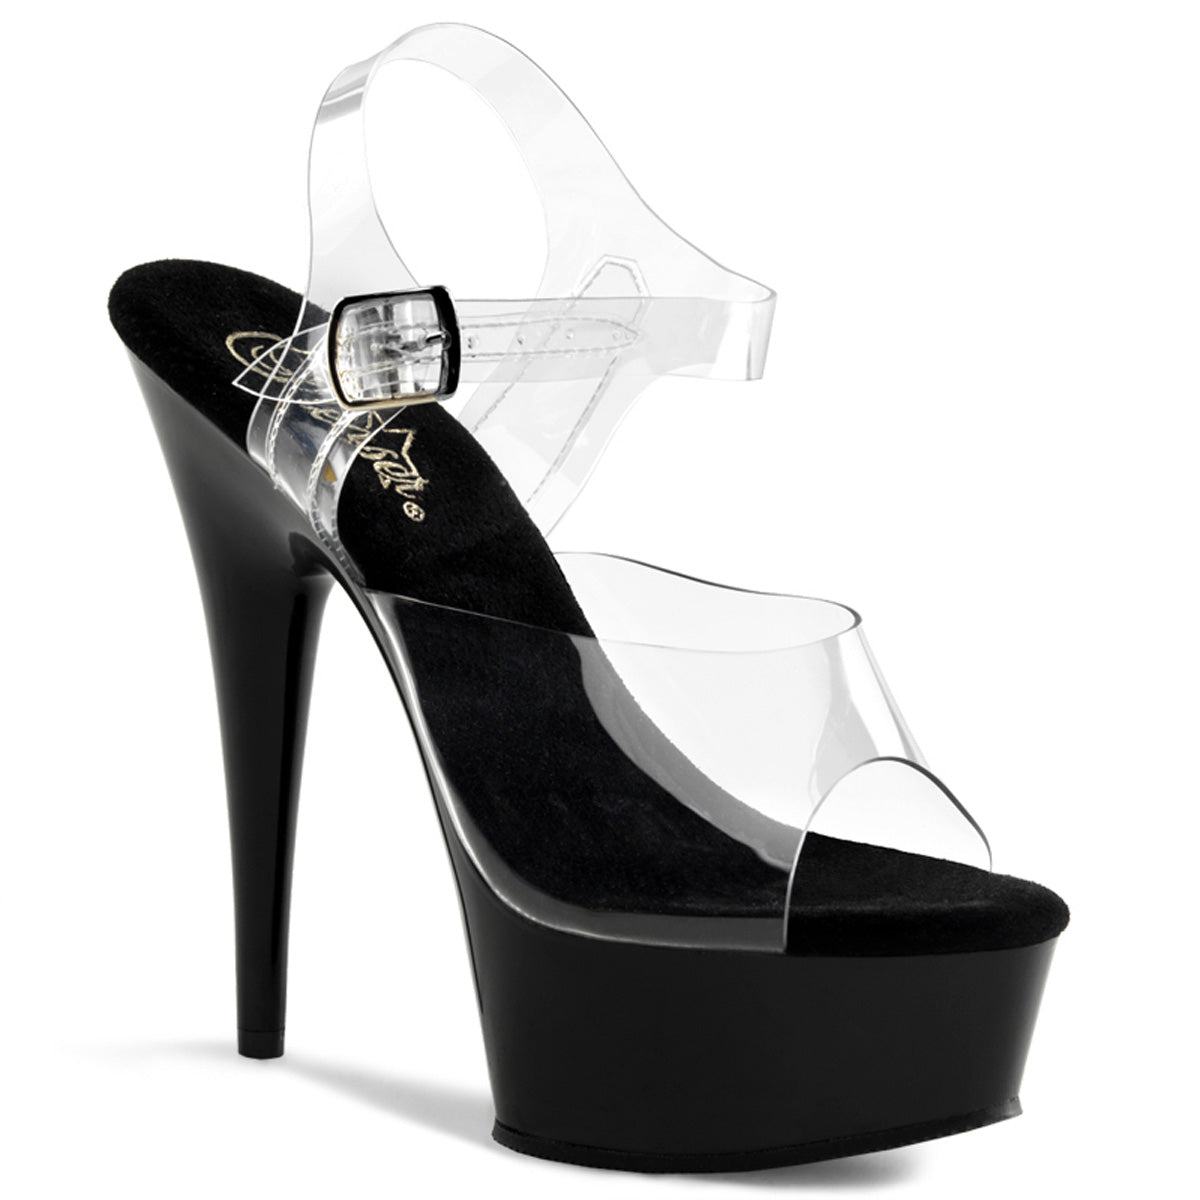 Pleaser Delight 608 Black/Clear - Model Express Vancouver